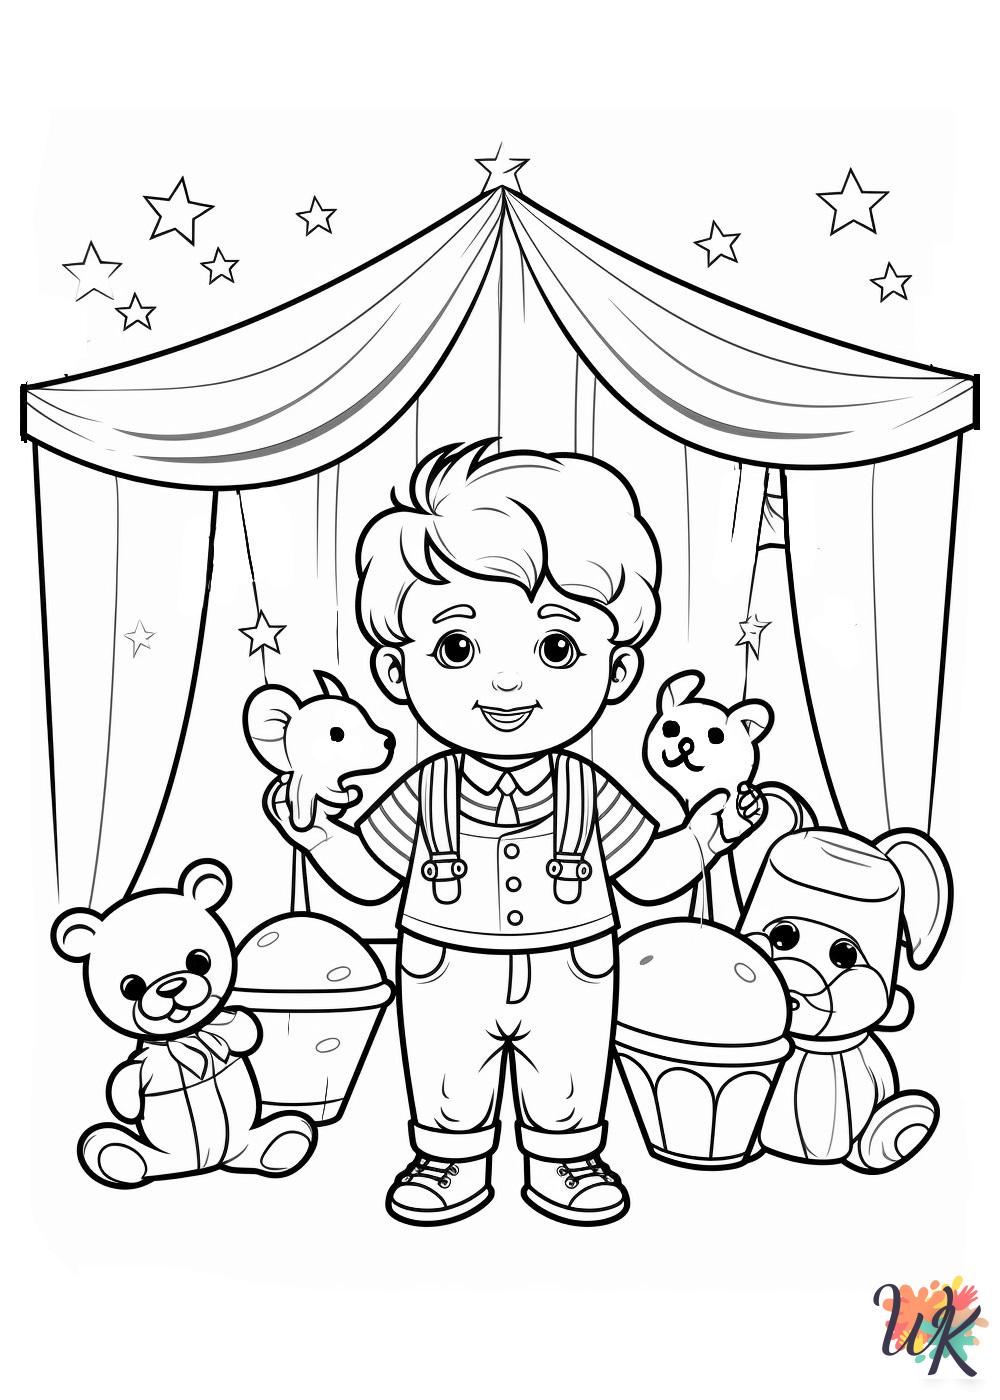 Circus coloring pages printable free